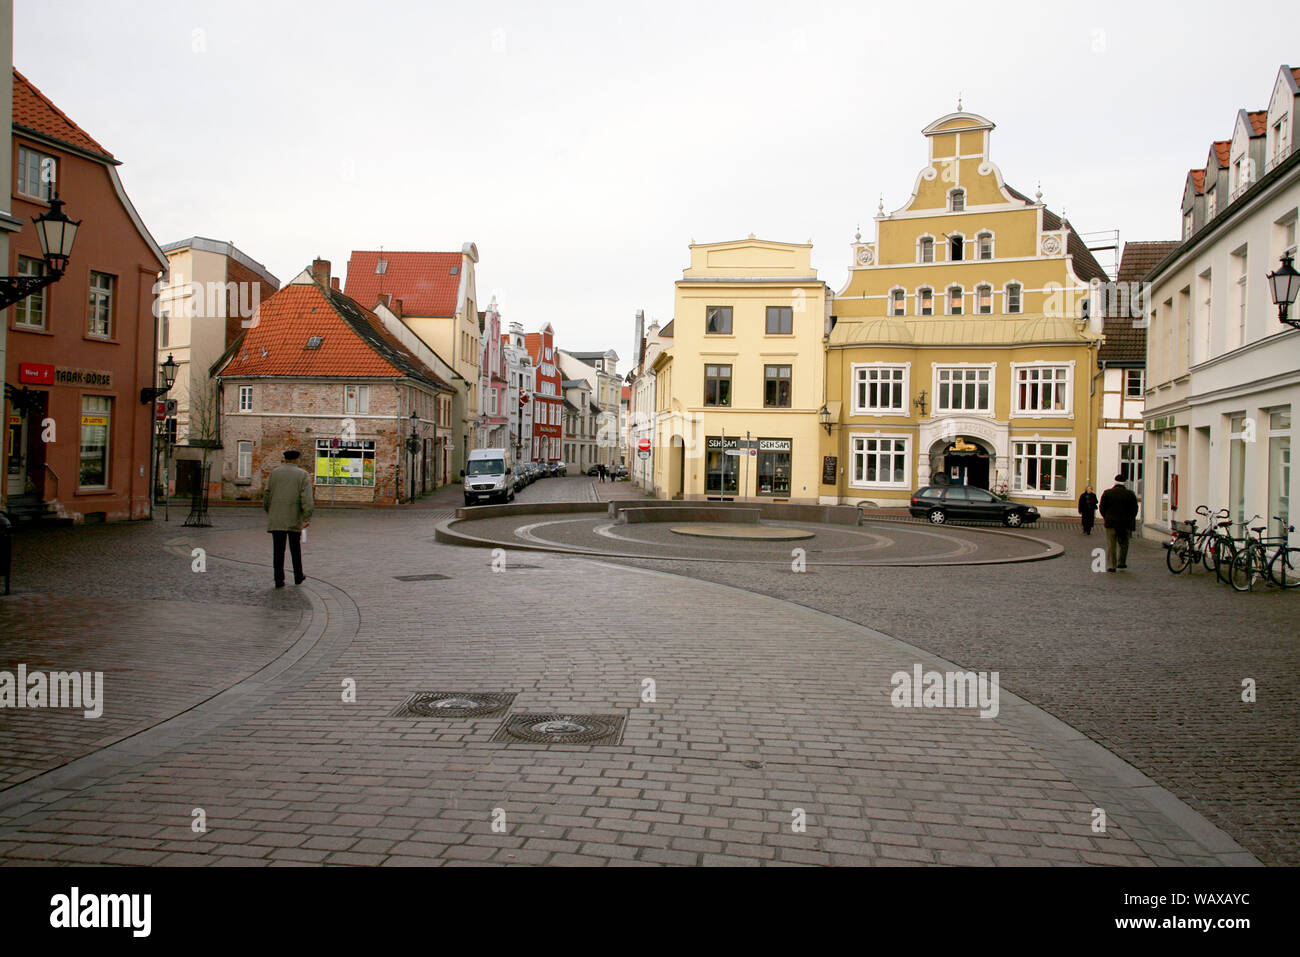 WISMAR Hanseatic city in northern Germany on the Baltic sea buildings in old town Stock Photo